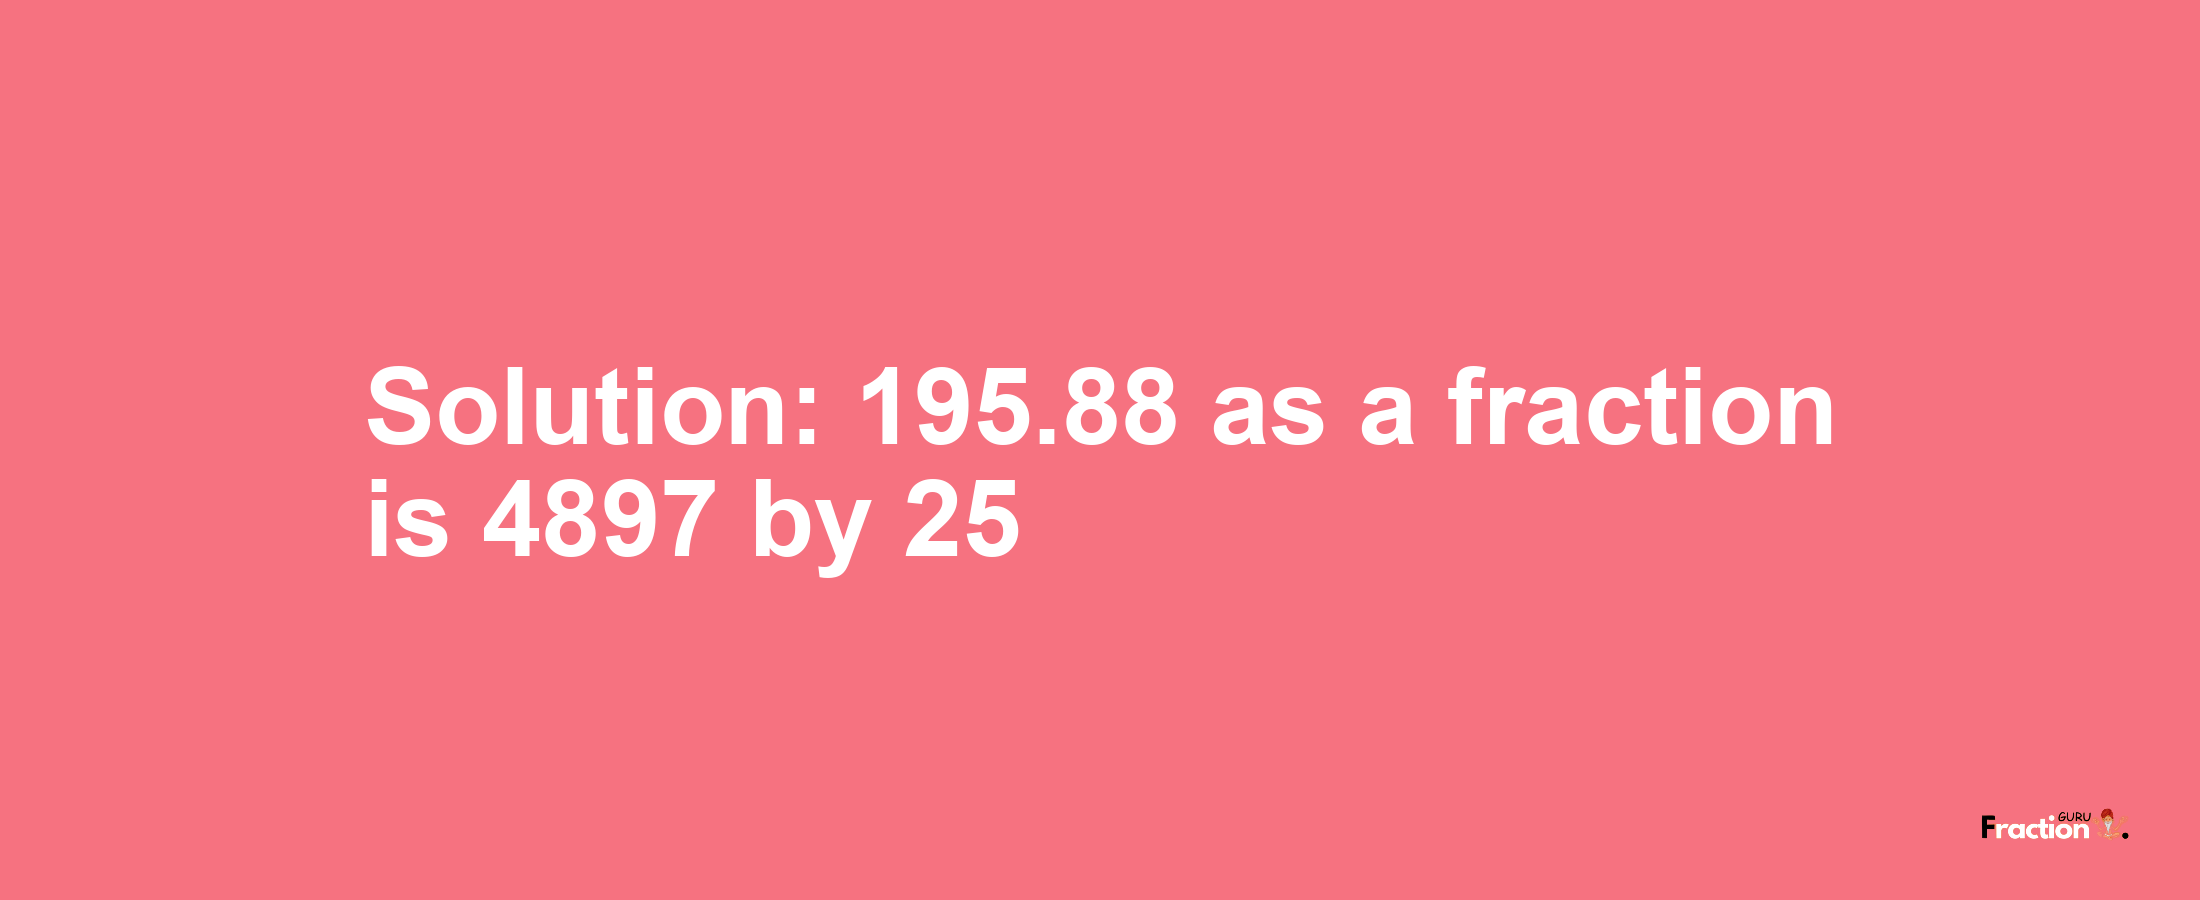 Solution:195.88 as a fraction is 4897/25